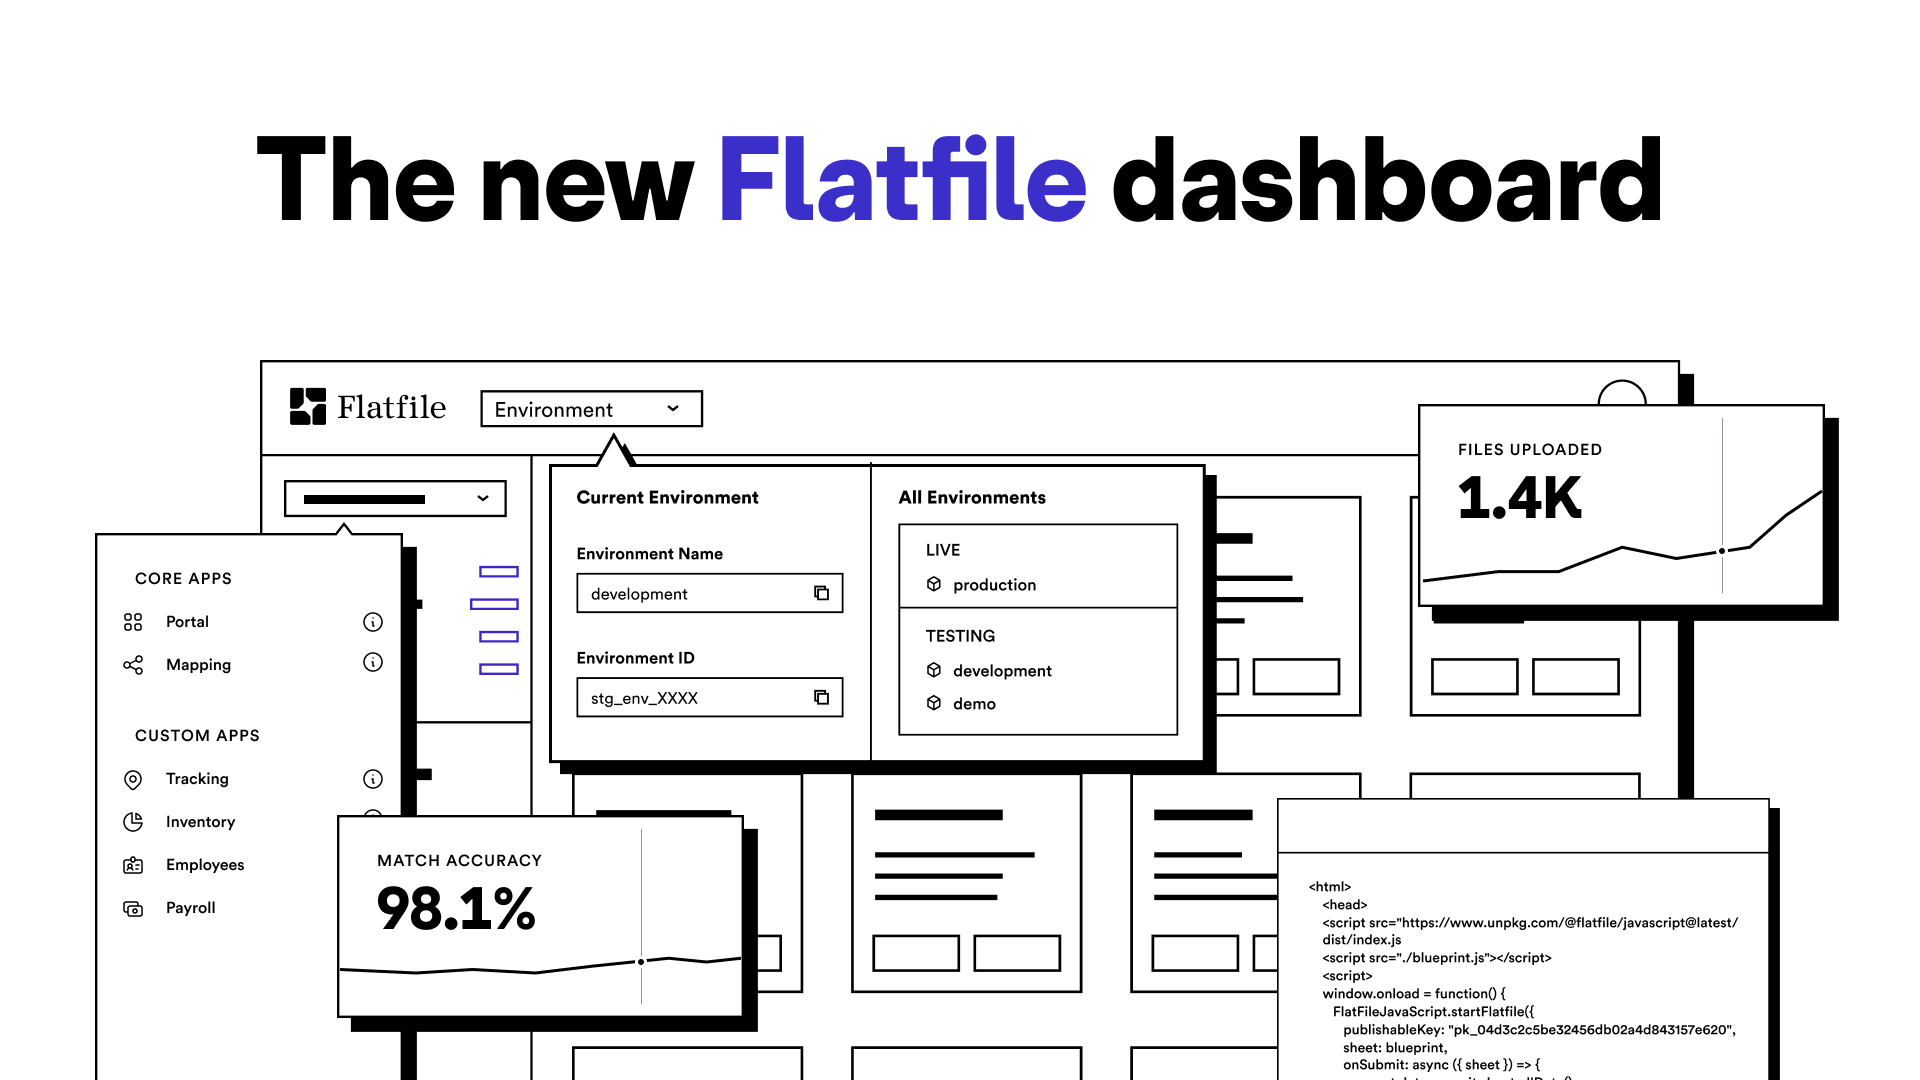 The new Flatfile dashboard on a white background with icons representing a dashboard